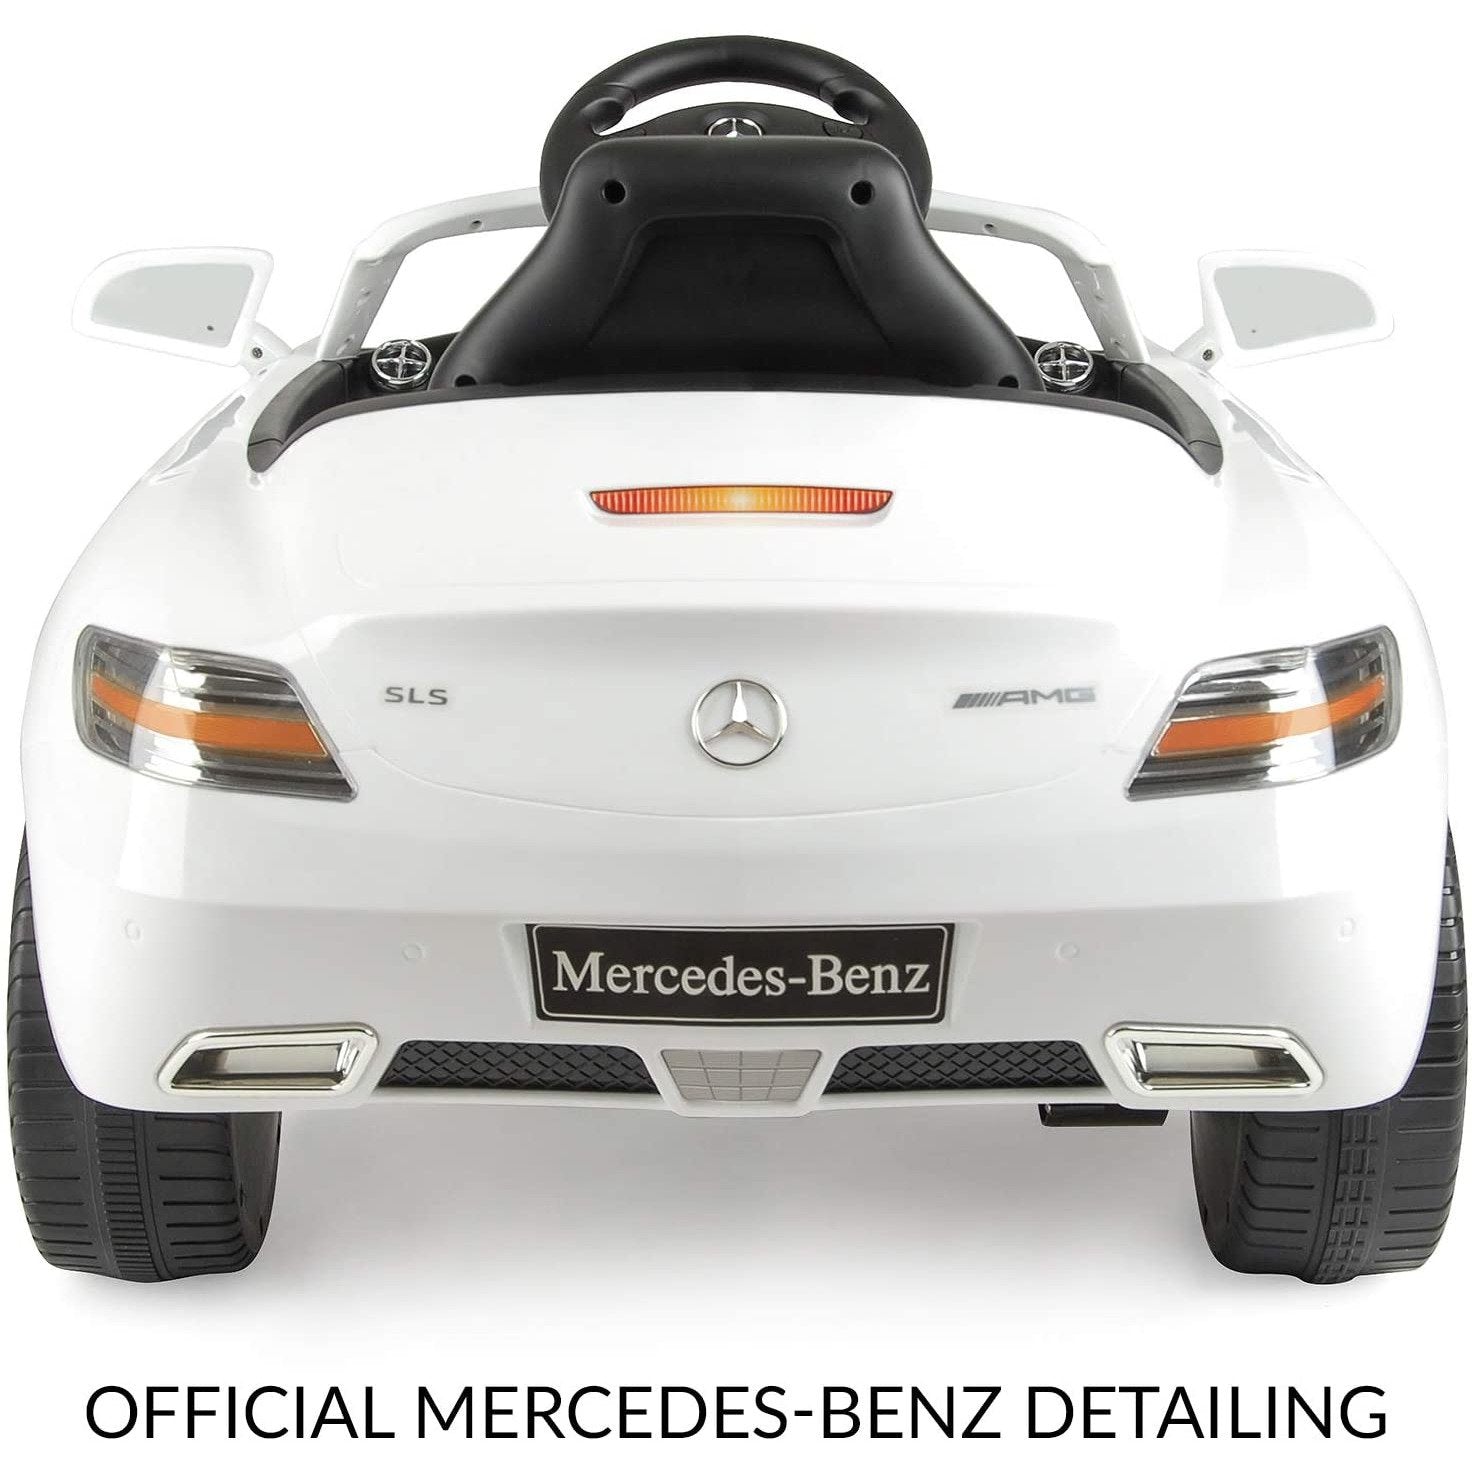 Licensed Battery Operated Ride on 6v Mercedes SLS Coupe car